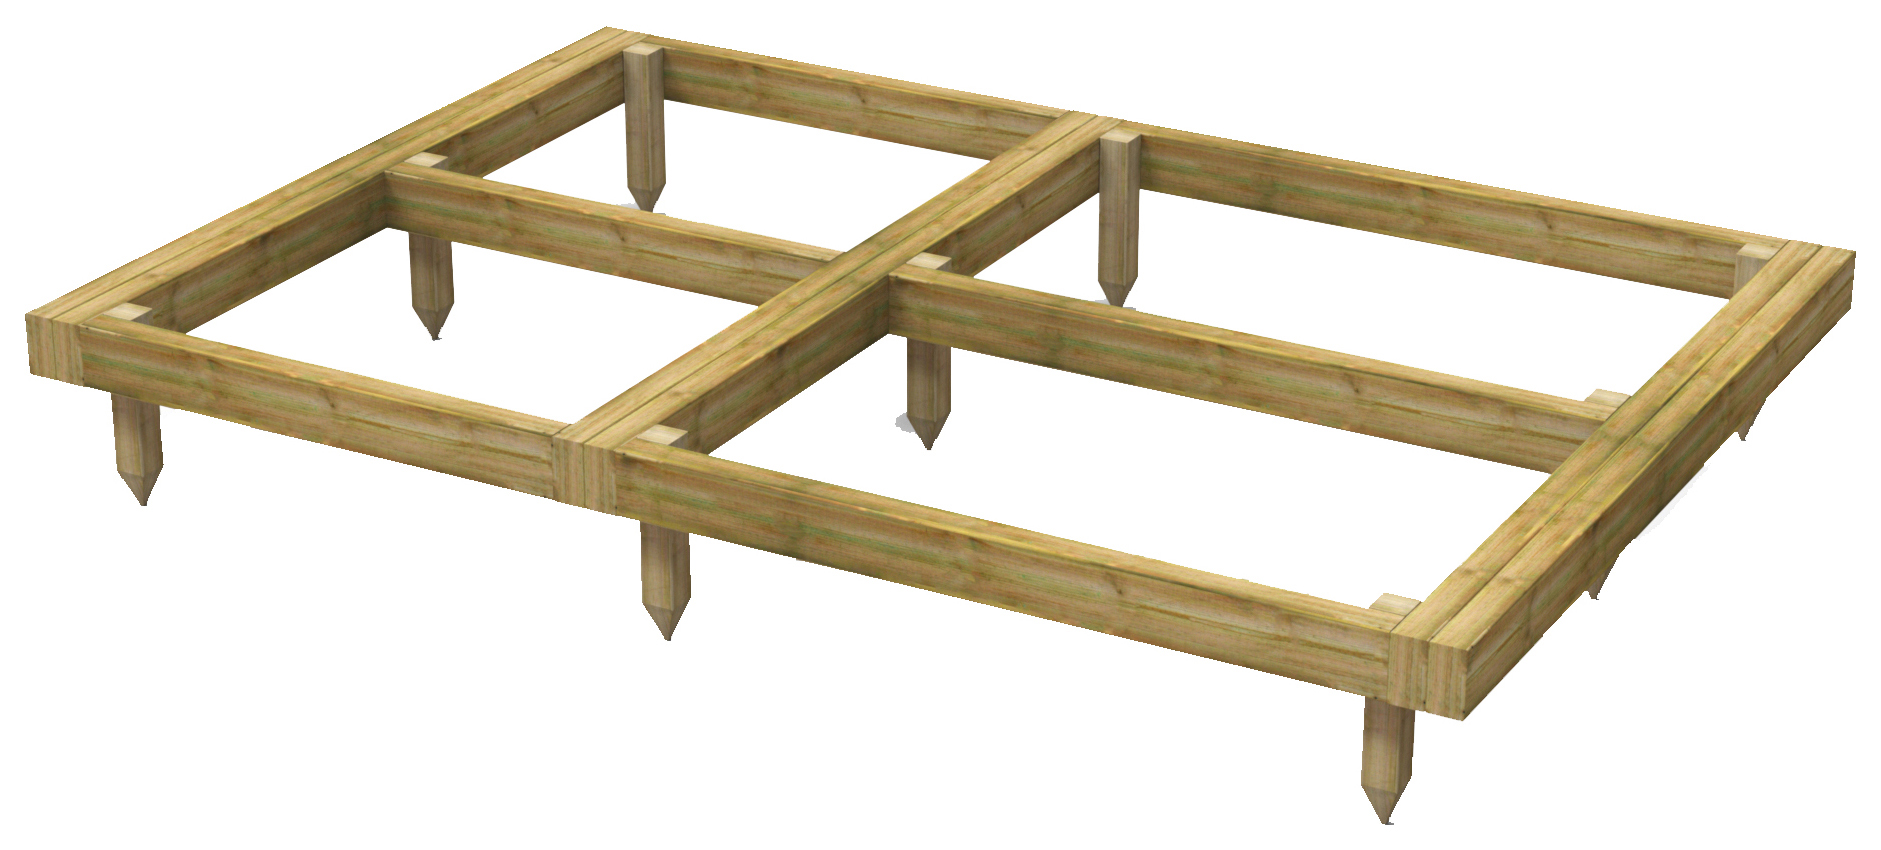 Image of Power Sheds 7 x 5ft Pressure Treated Garden Building Base Kit